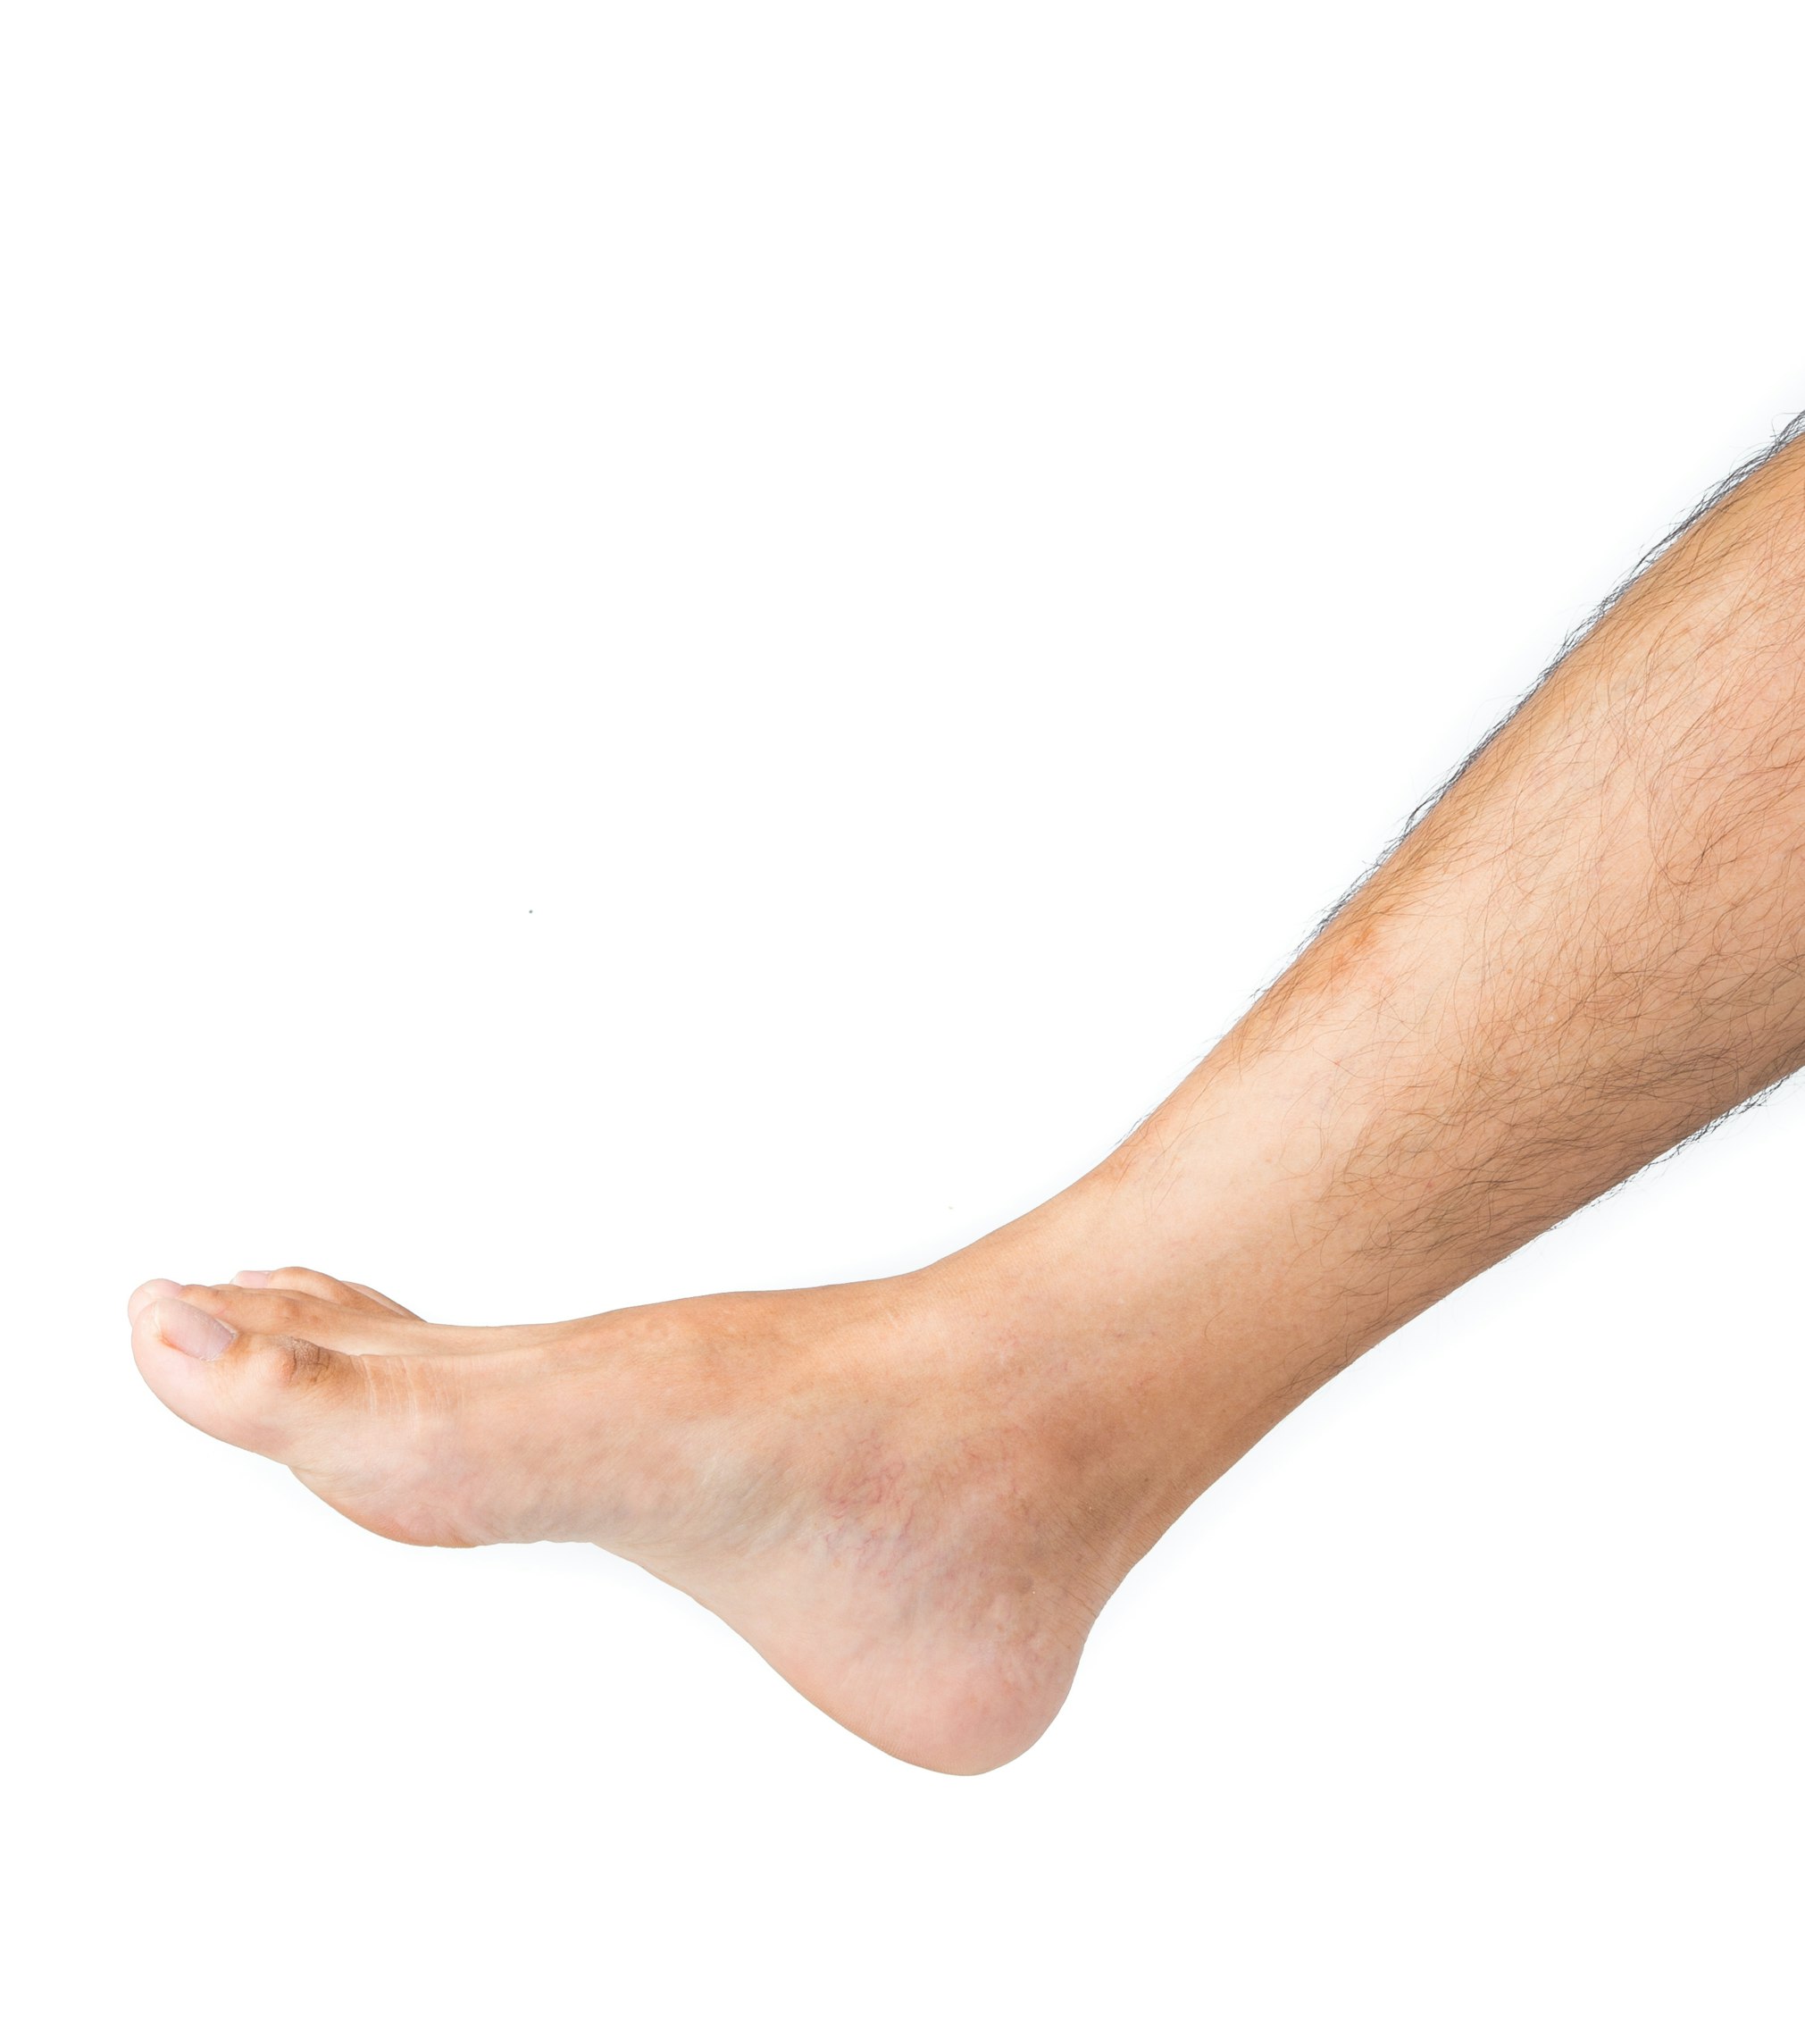 The Dreaded Cankle, Defined: What Are They and How Do I Treat Them?